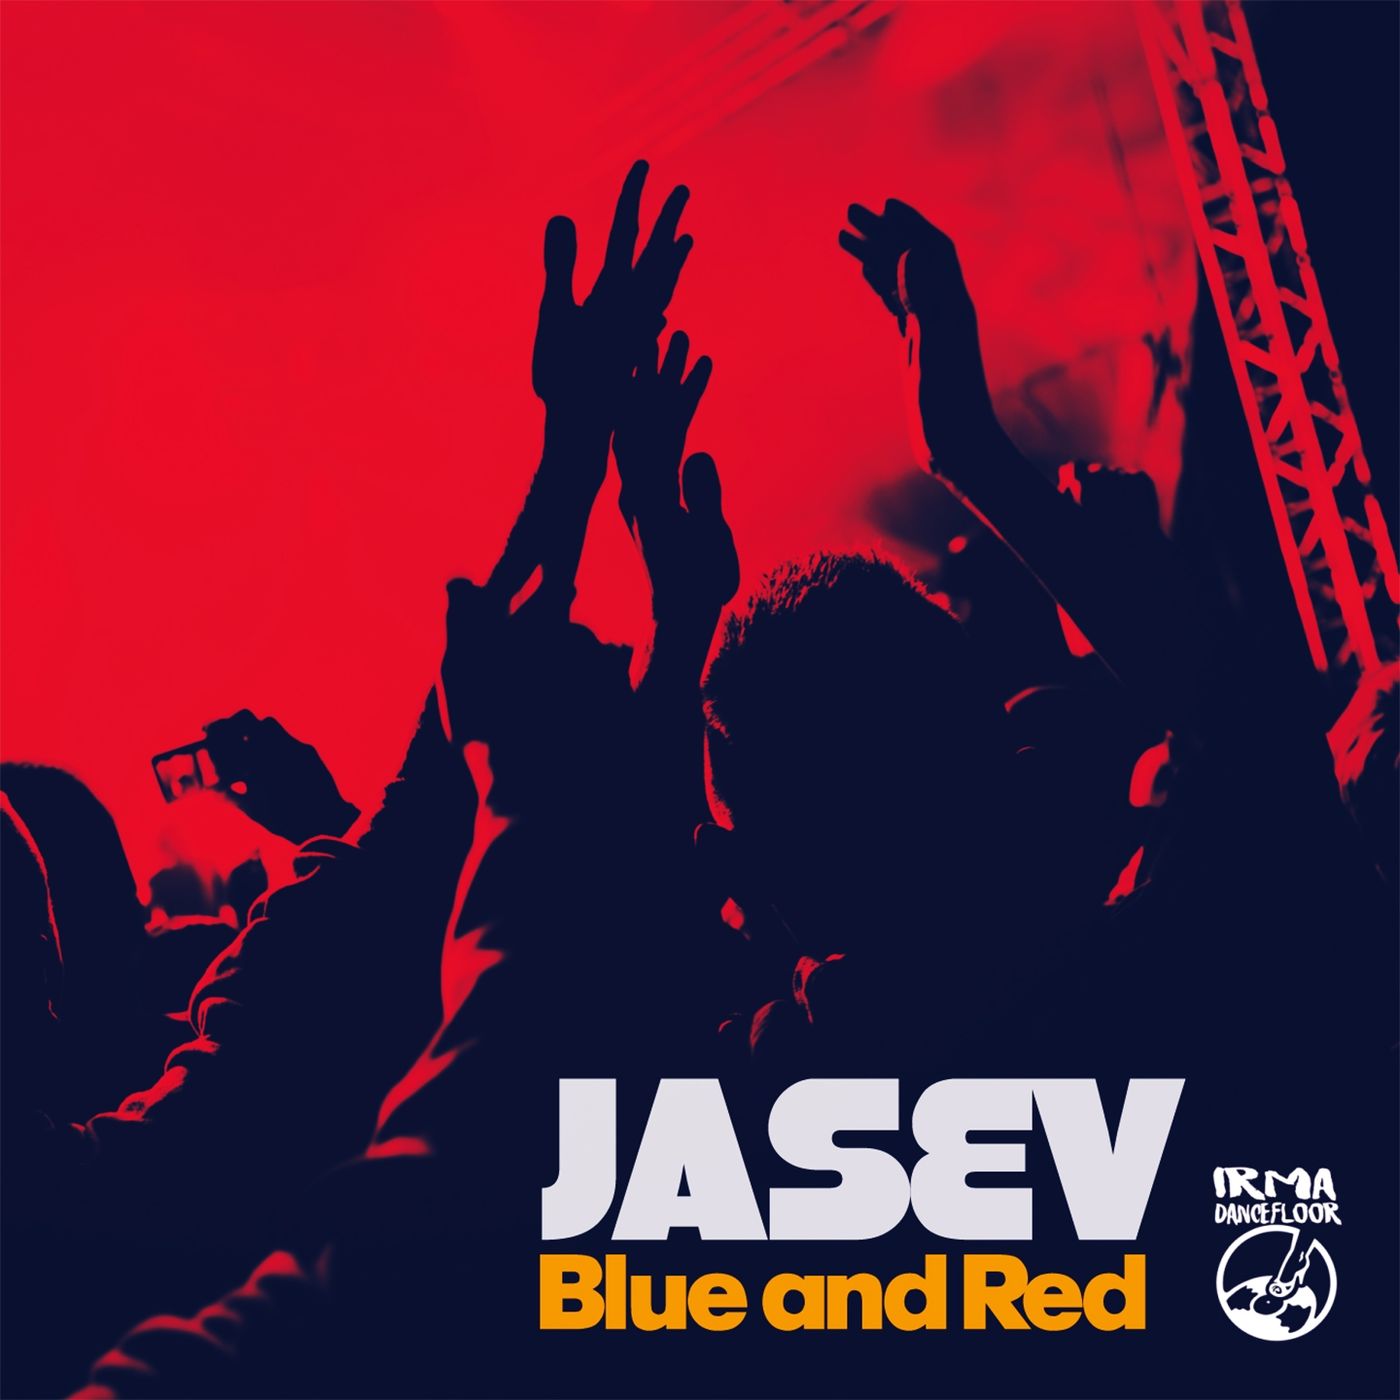 Jasev - Blue and Red / Irma Records